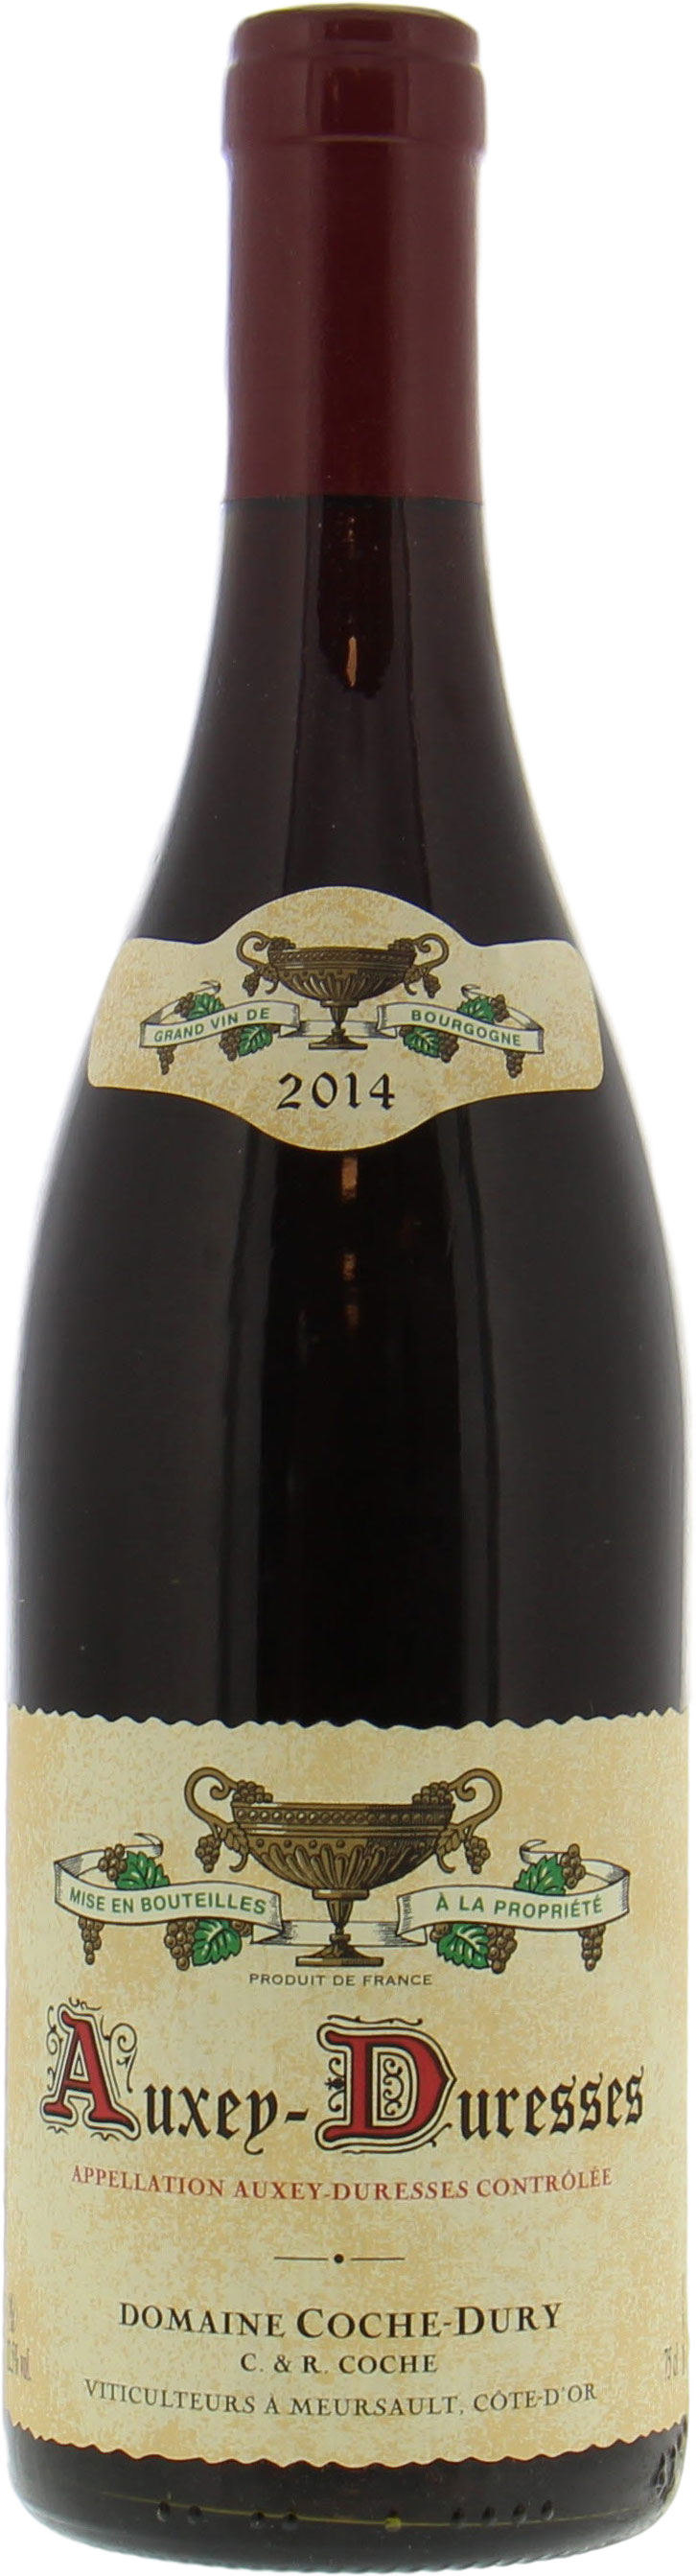 Coche Dury - Auxey-Duresses 2014 Perfect